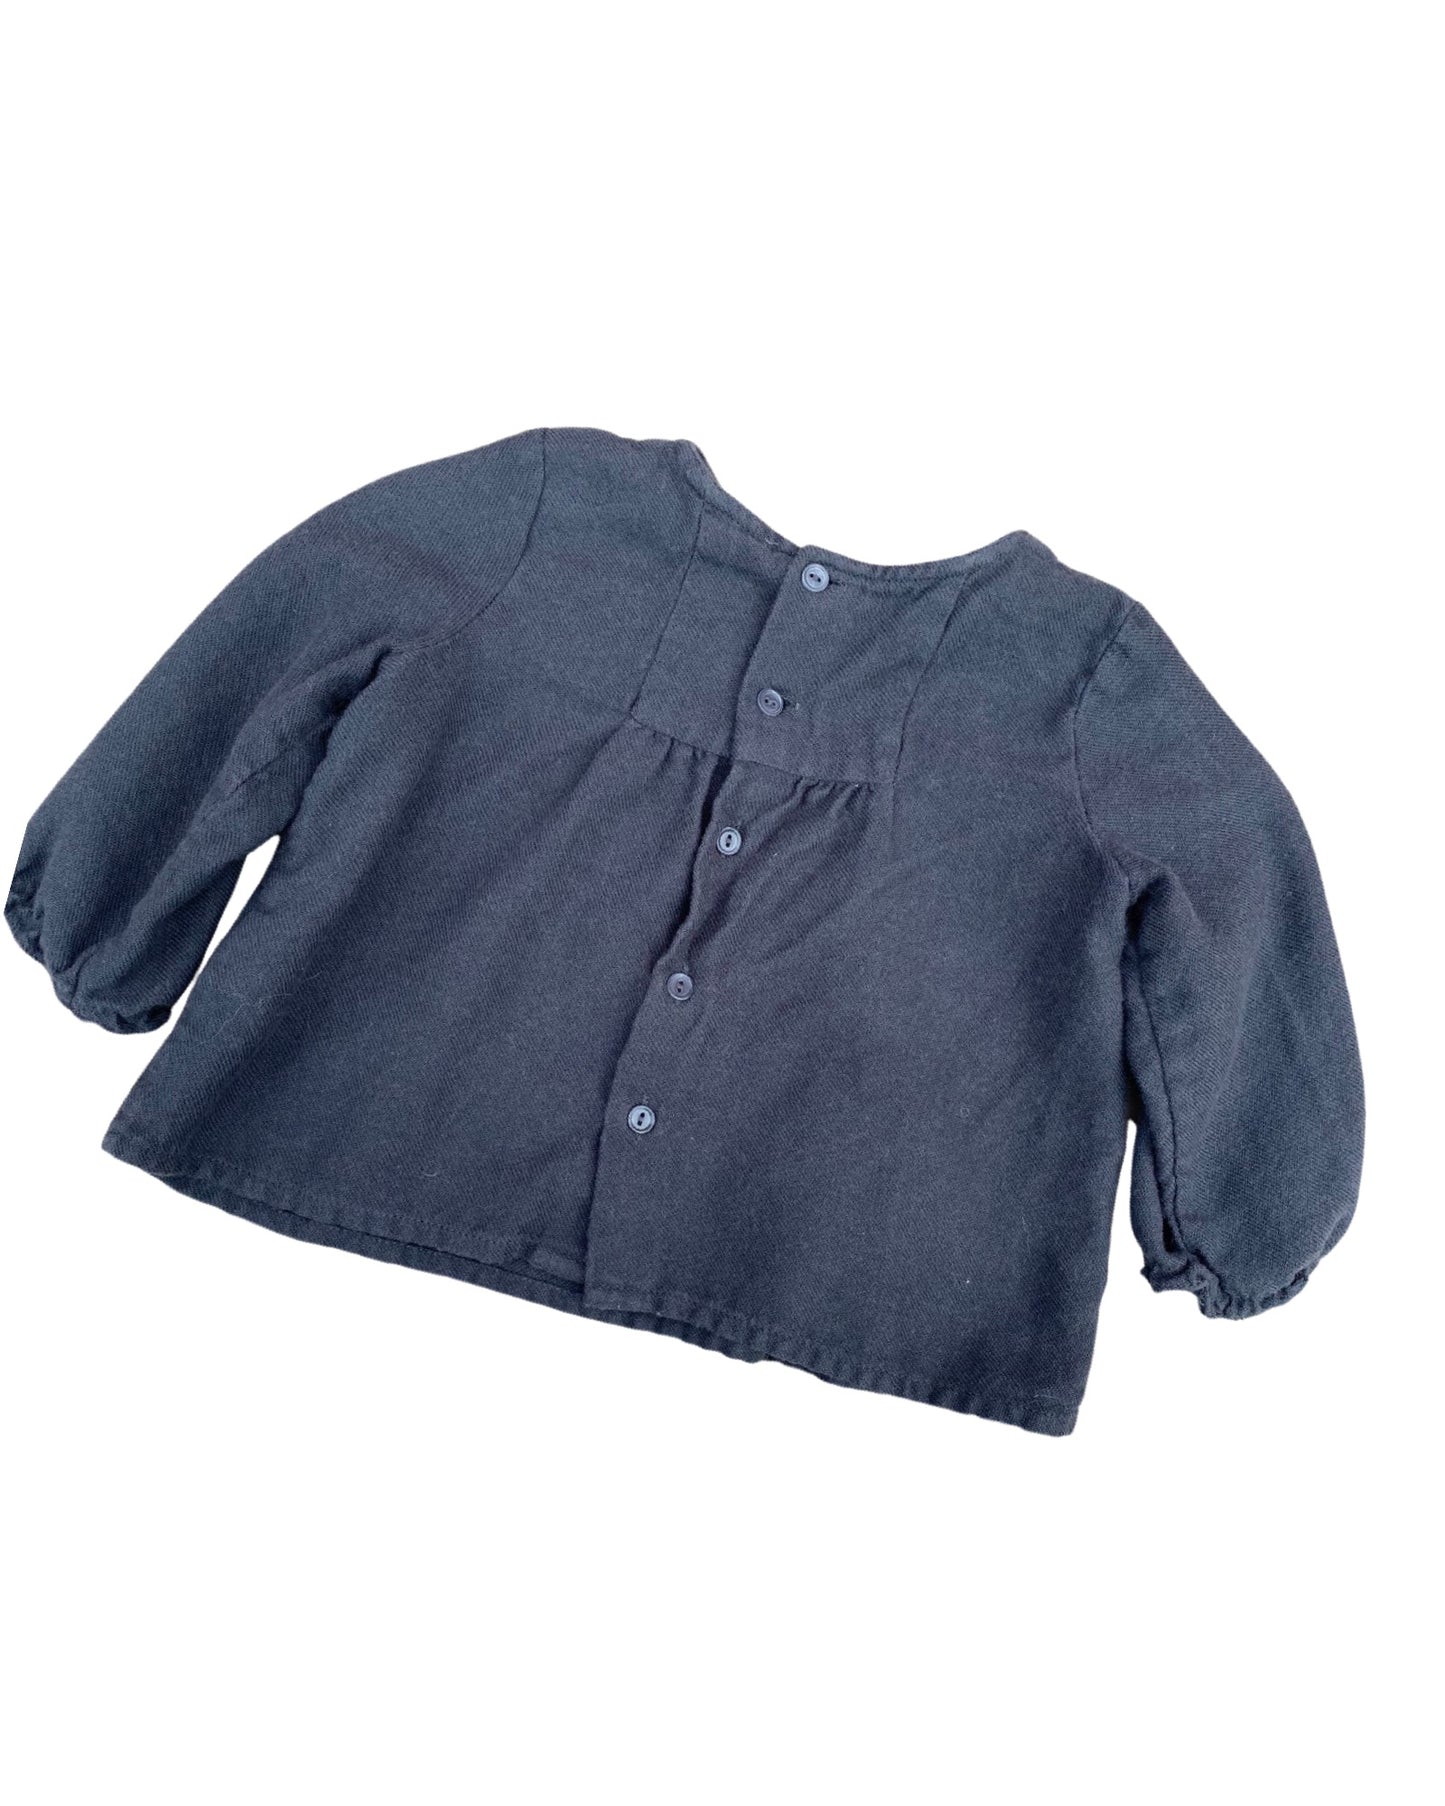 Bonpoint dark grey cotton blouse with floral embroidery (3-6mths)